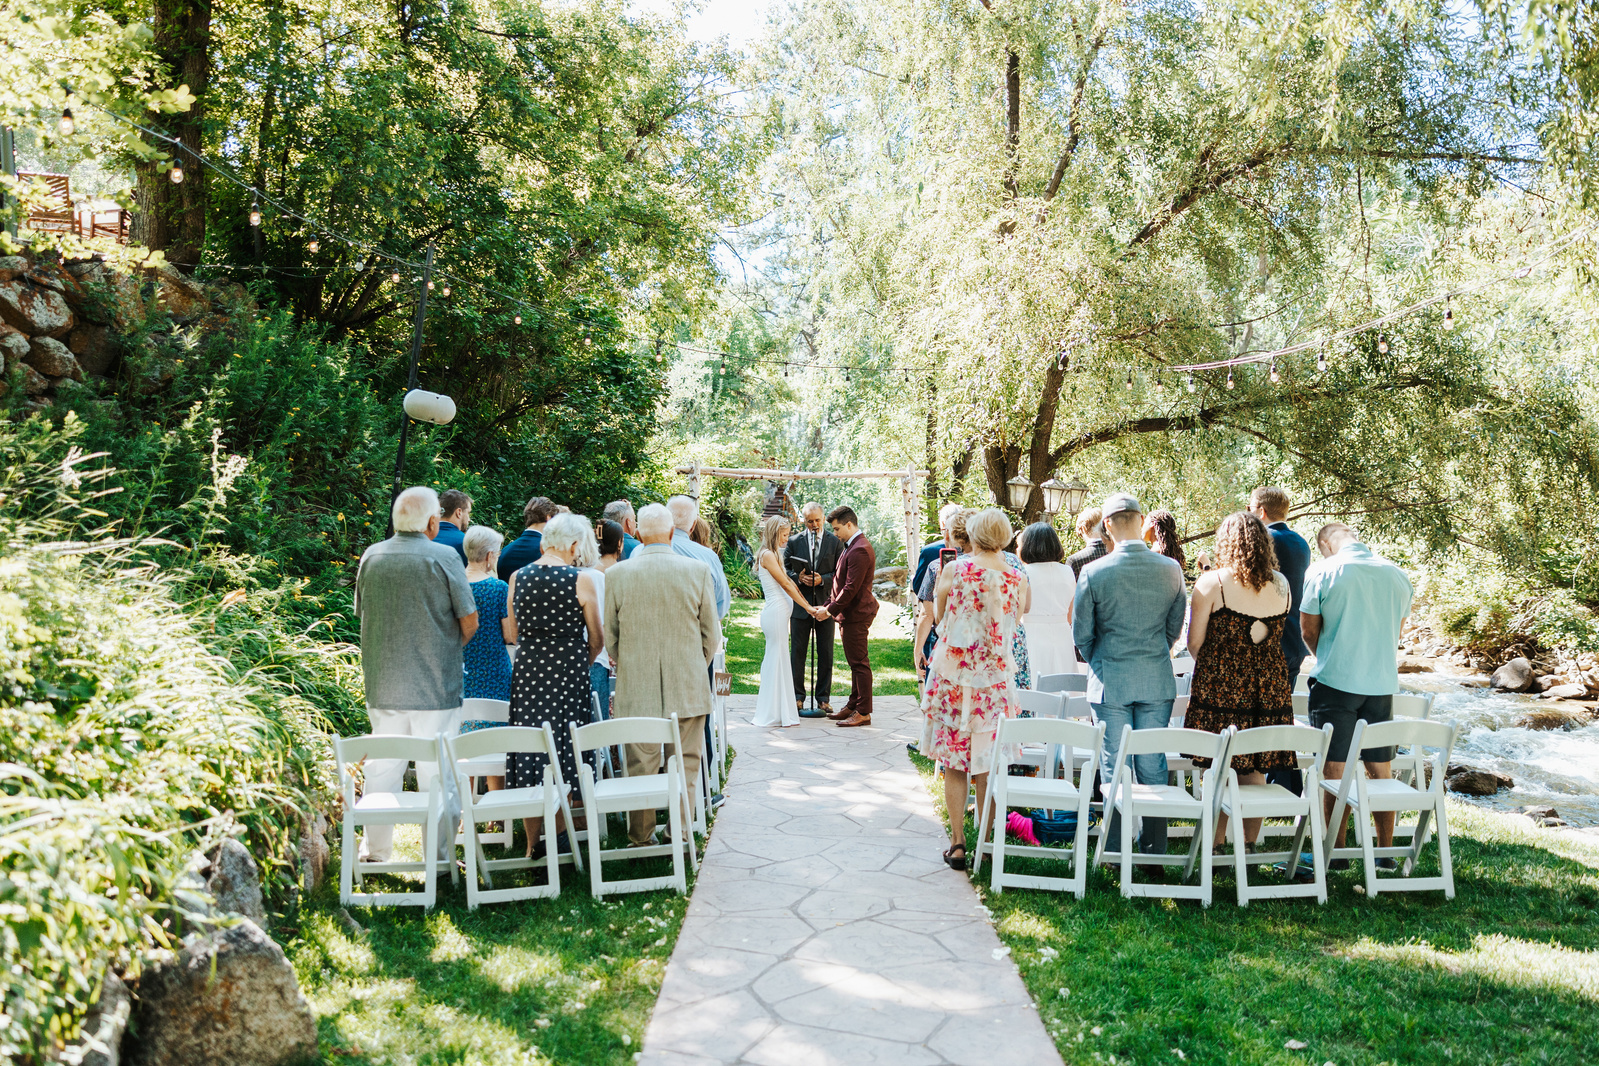 Wedding ceremony at Wedgewood Weddings - Boulder Creek by the river during an early morning ceremony in August, captured by Denver Wedding Photographer